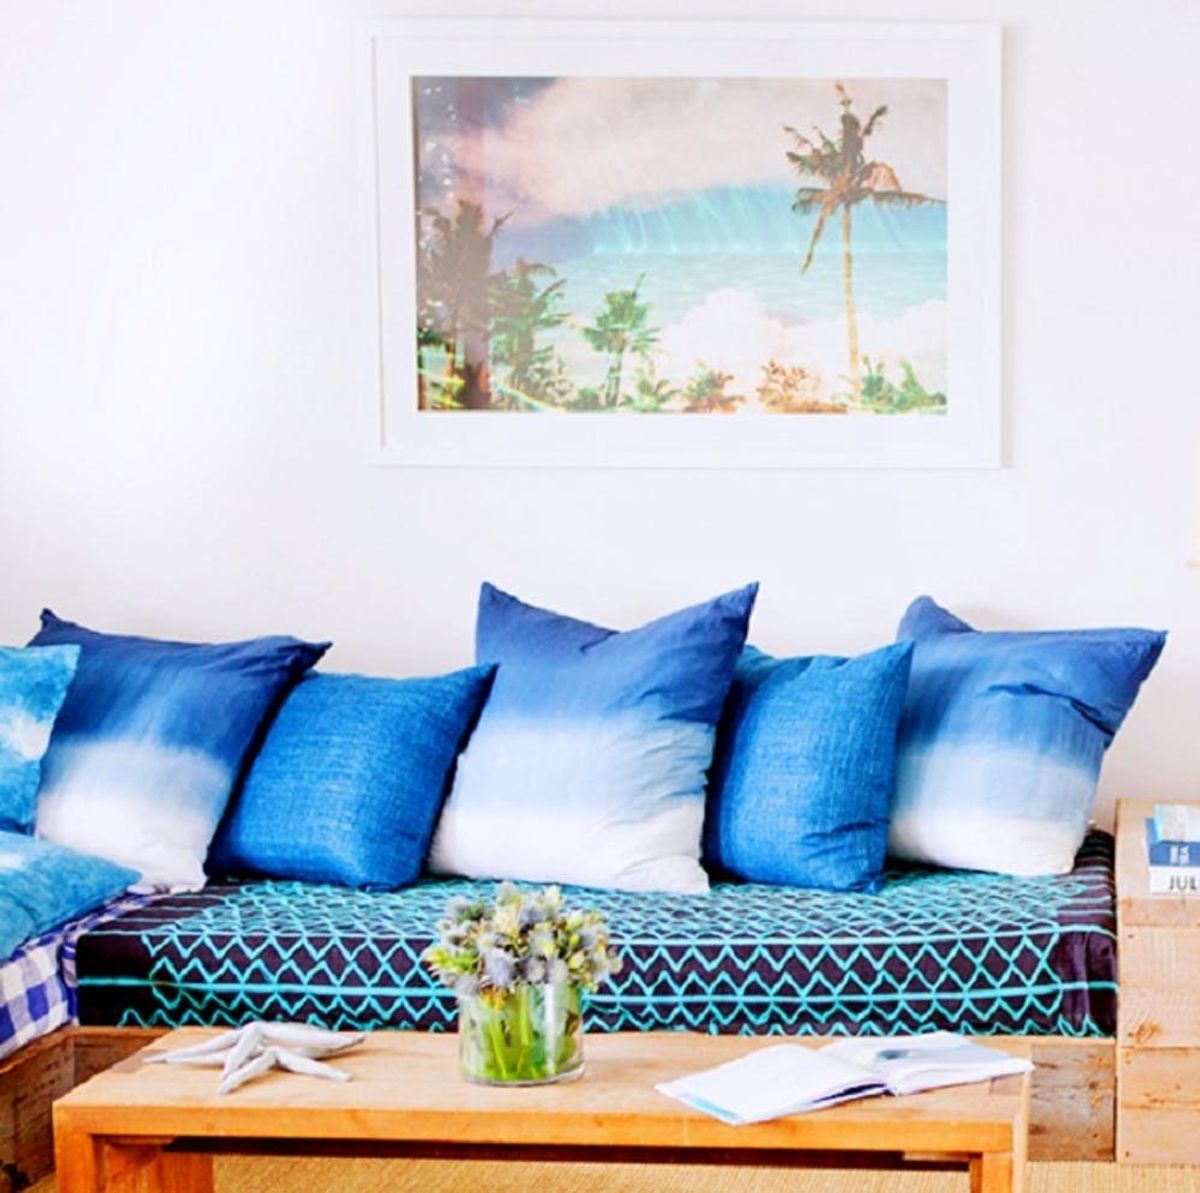 13 Quick Tips to Give Your Living Room a Sunny Refresh